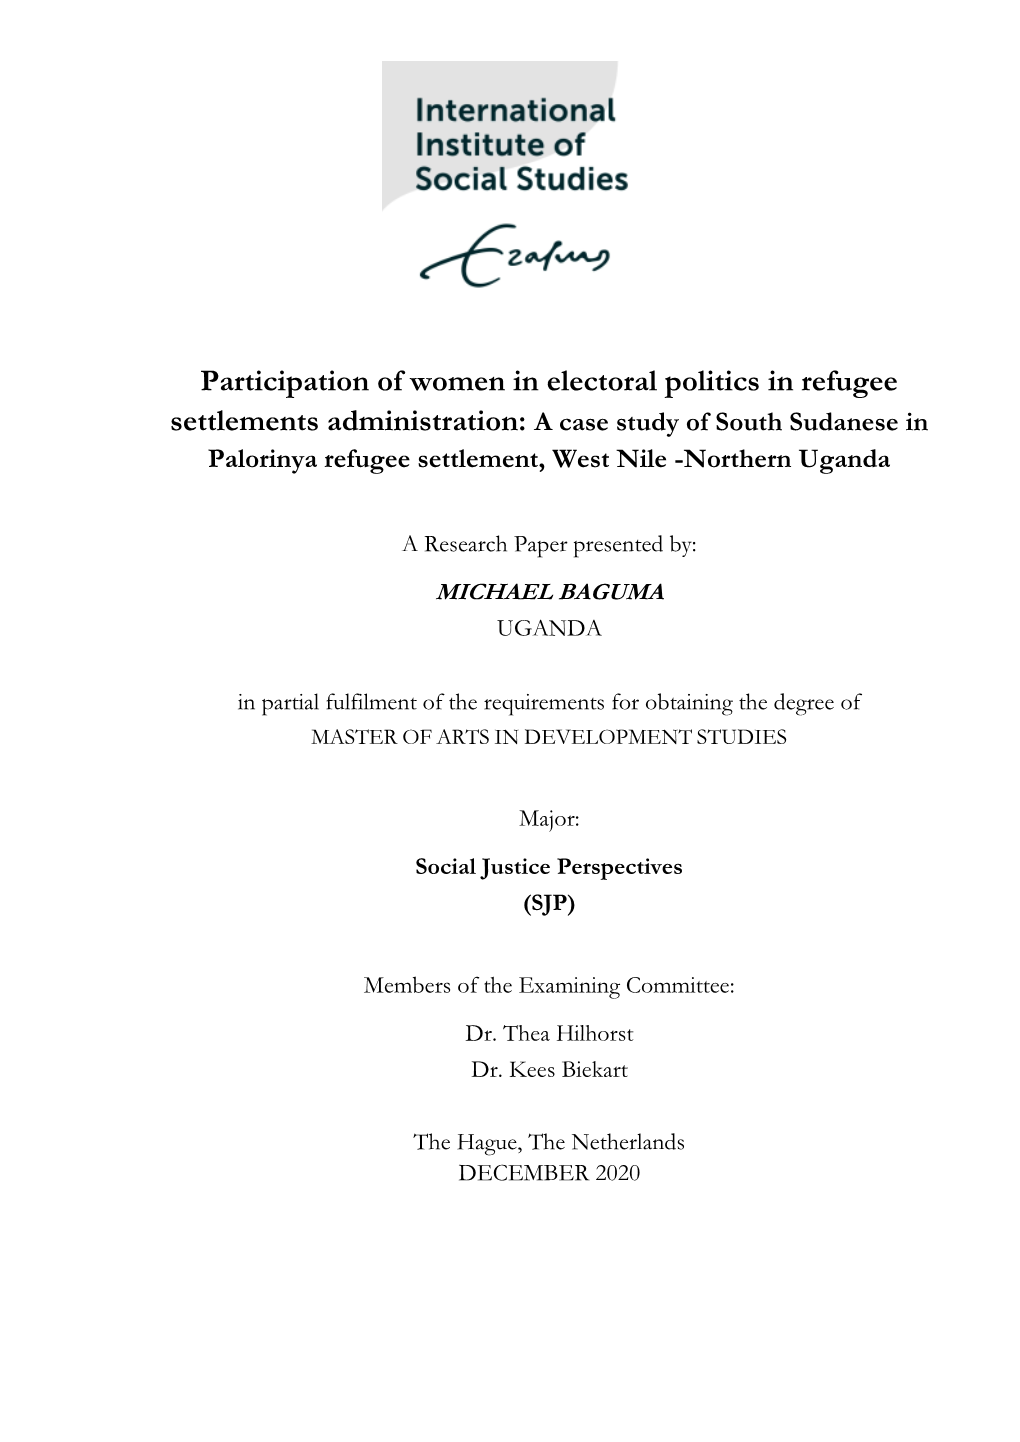 Participation of Women in Electoral Politics in Refugee